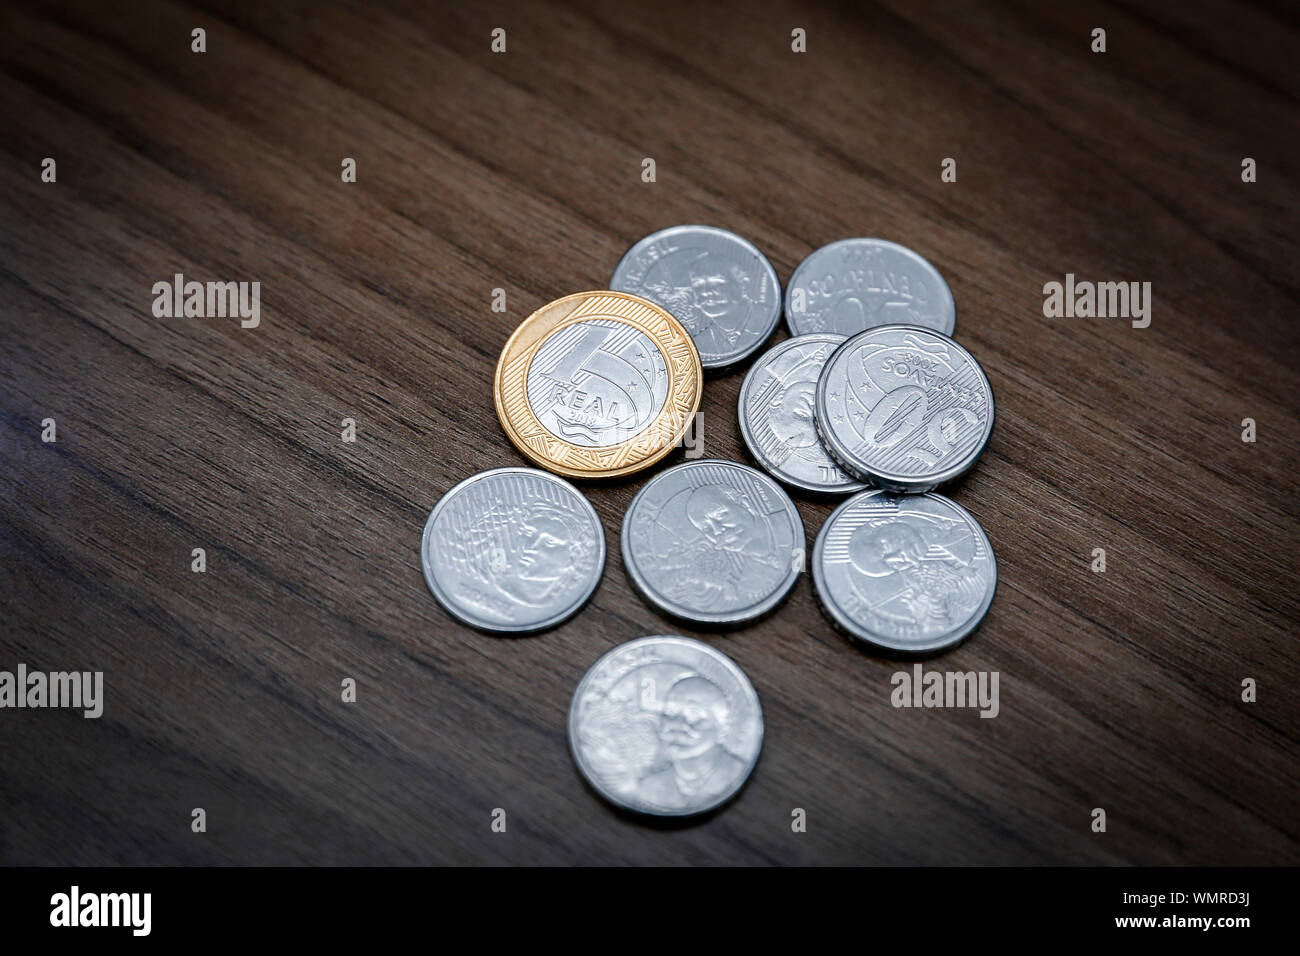 Money from Brazil, coins of Real, Brazil BRL coin, Brazilian currency, economy and business. Stock Photo